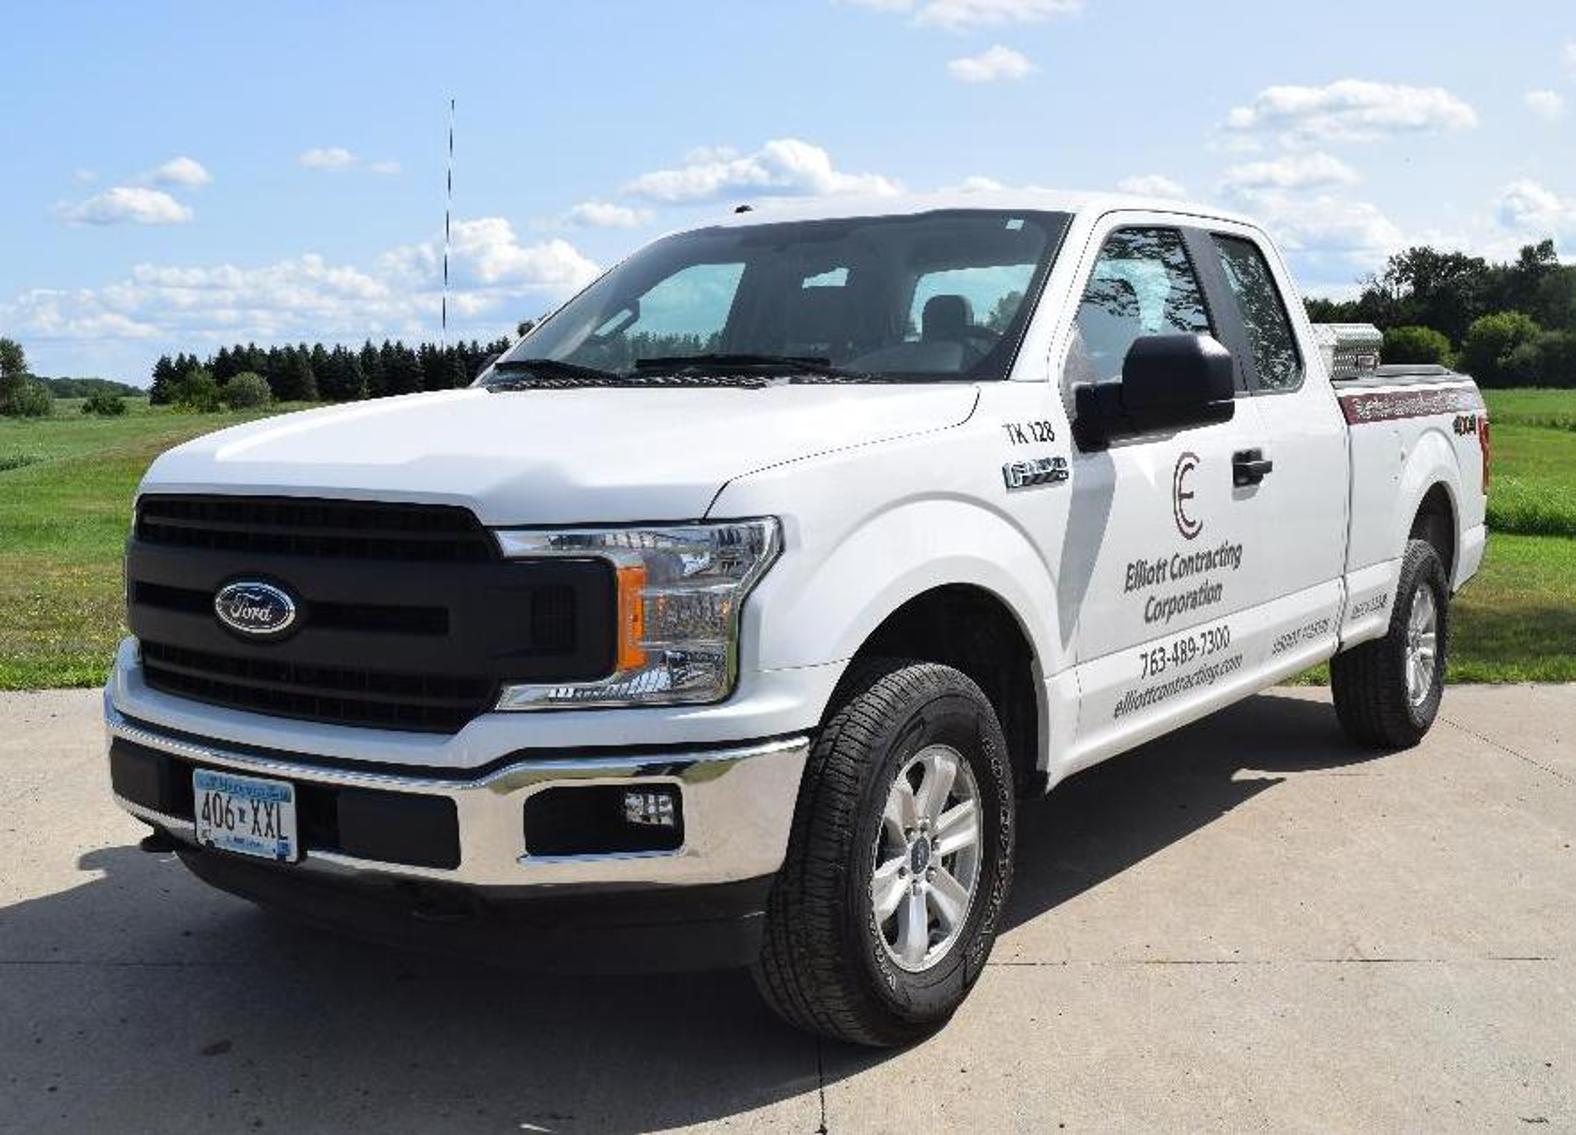 Late Model Electrical Contractor Vehicles